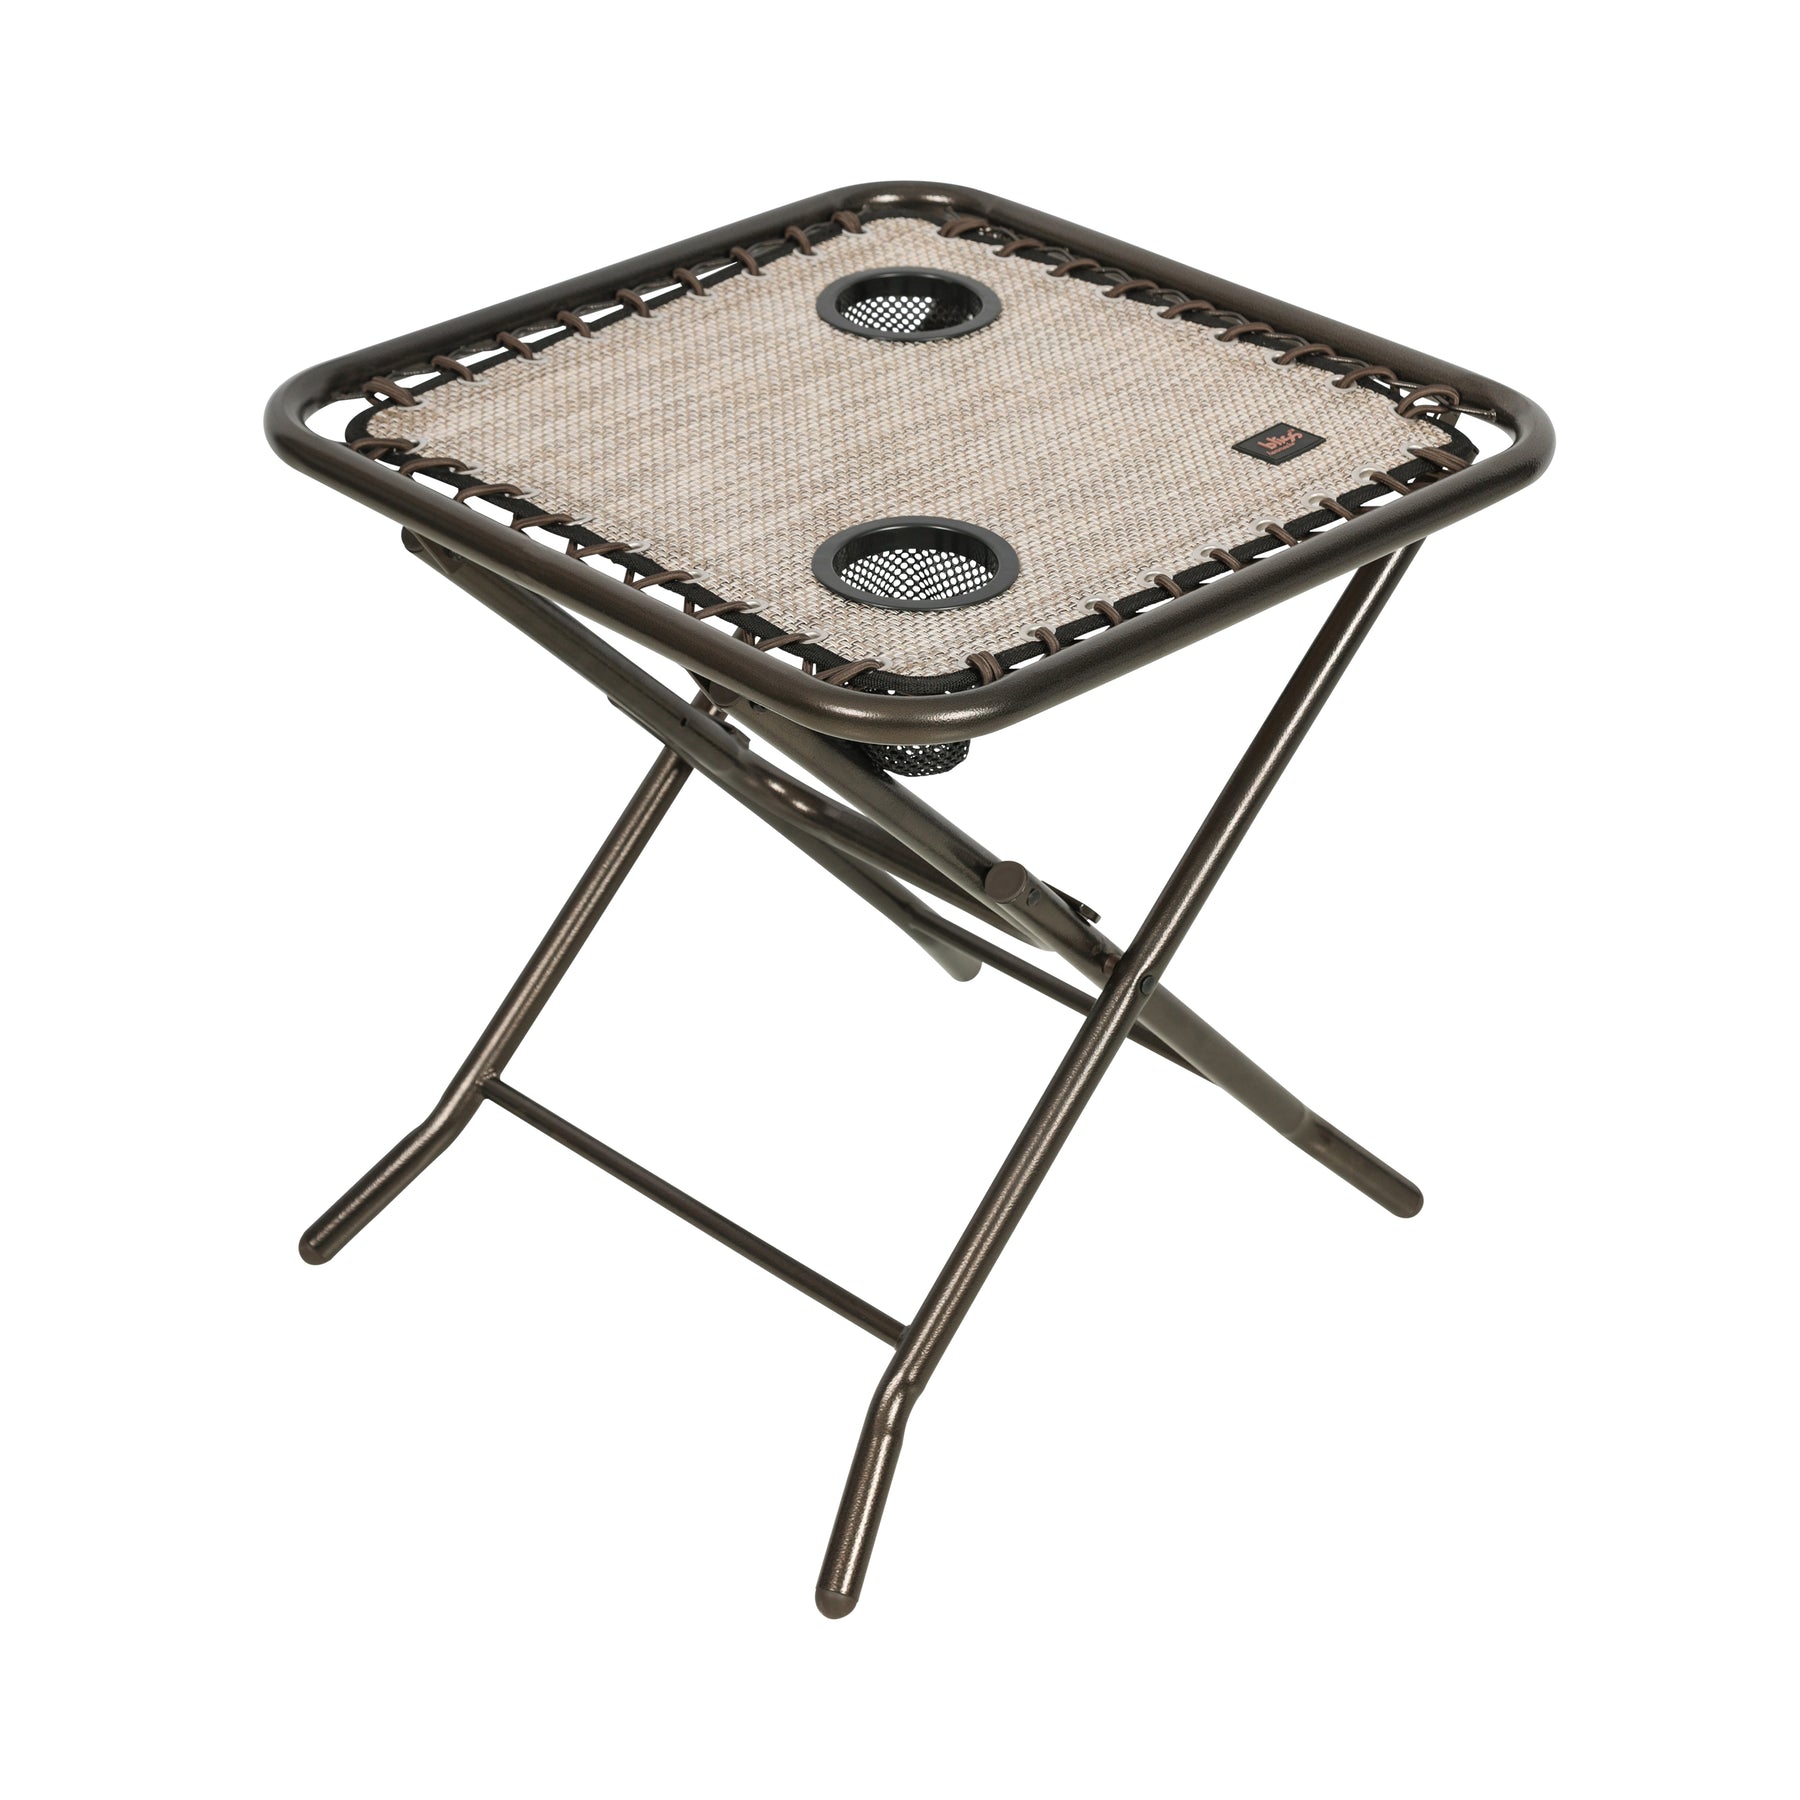 Bliss Hammocks 20-inch Folding Side Table with 2 Built-In Cup Holders in the sand variation.